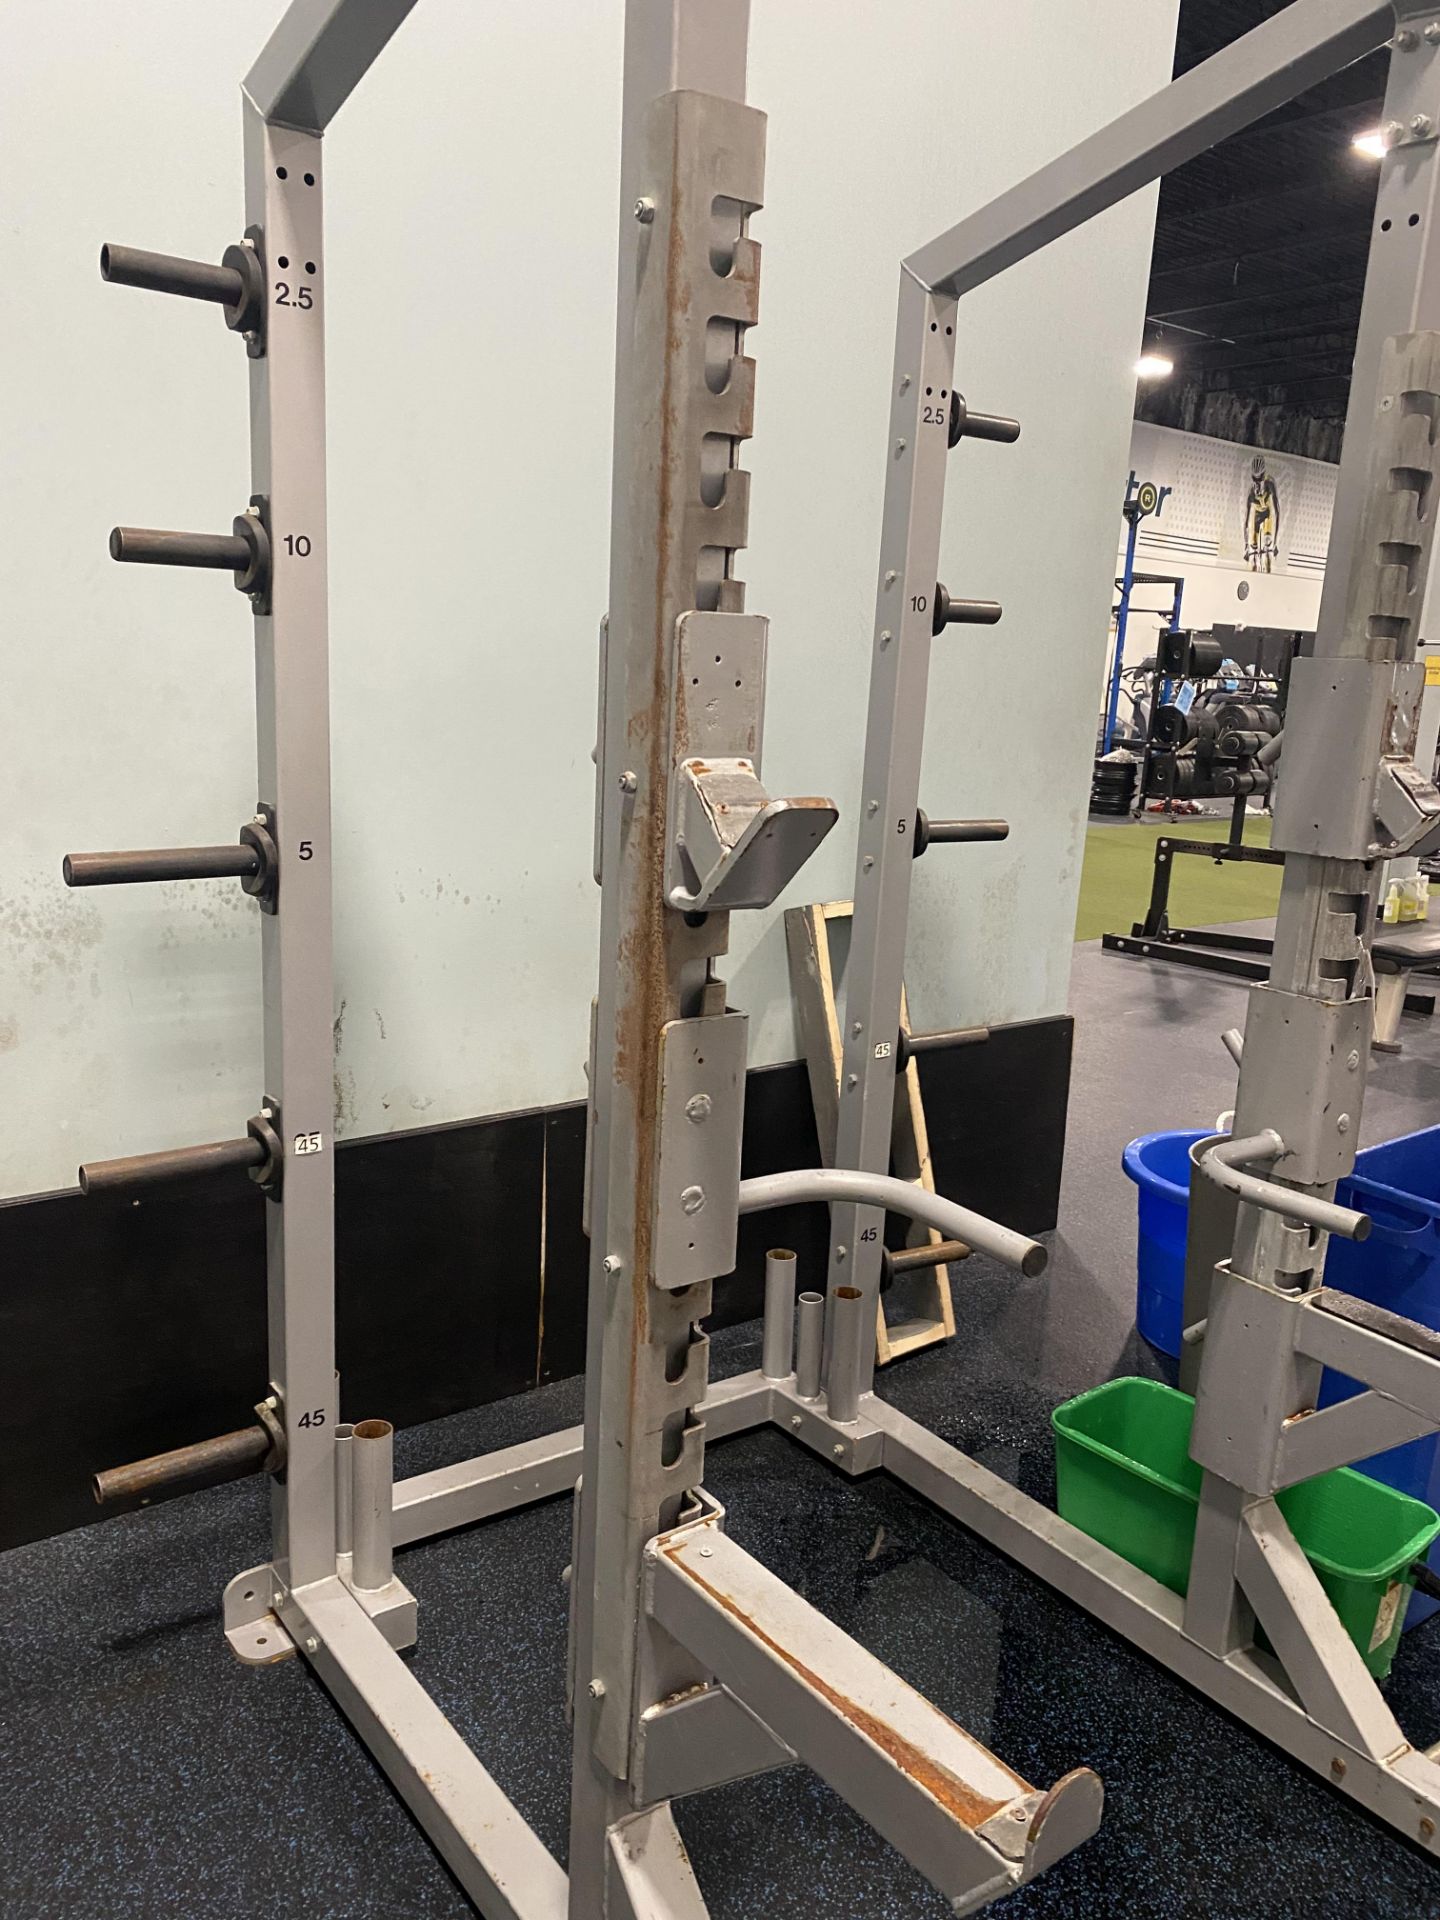 Squat Rack w/ Safety Bars, Weight Holder, and Pull up Bar (No Weights) - Image 2 of 4